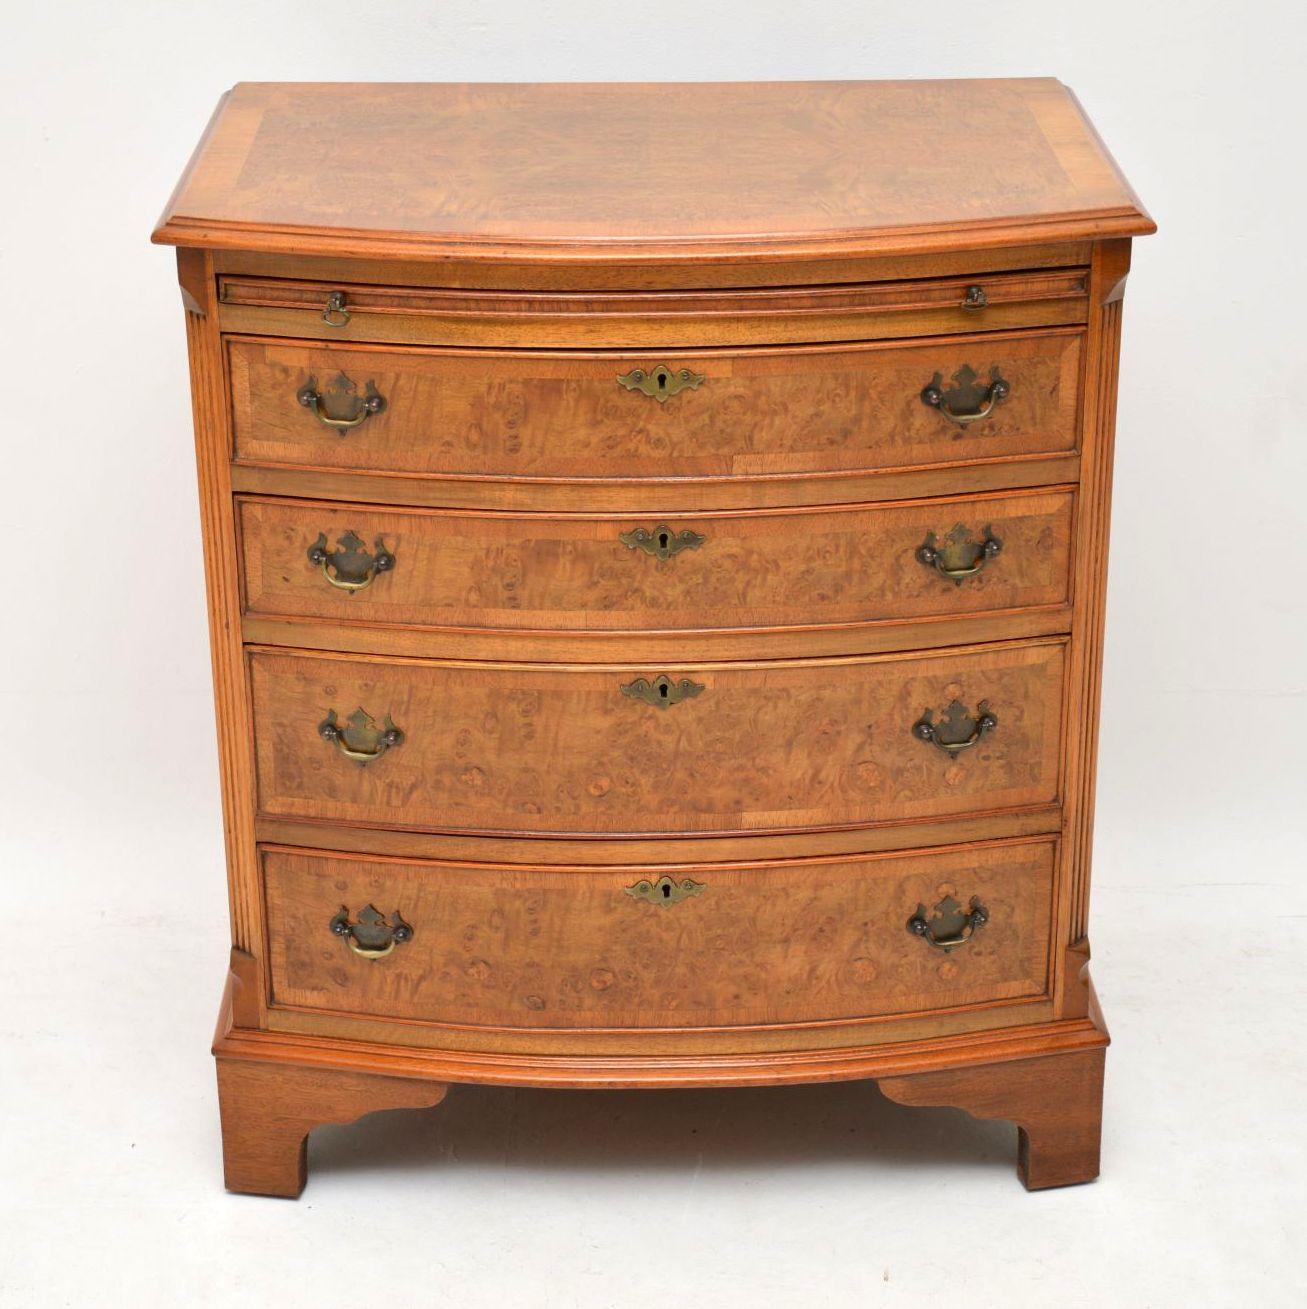 Small antique burr walnut bow fronted chest of drawers on bracket feet, with reeded canted corners and a brushing slide. It has a cross banded top, four graduated drawers also cross banded with original brass handles, locks and escutcheons. This